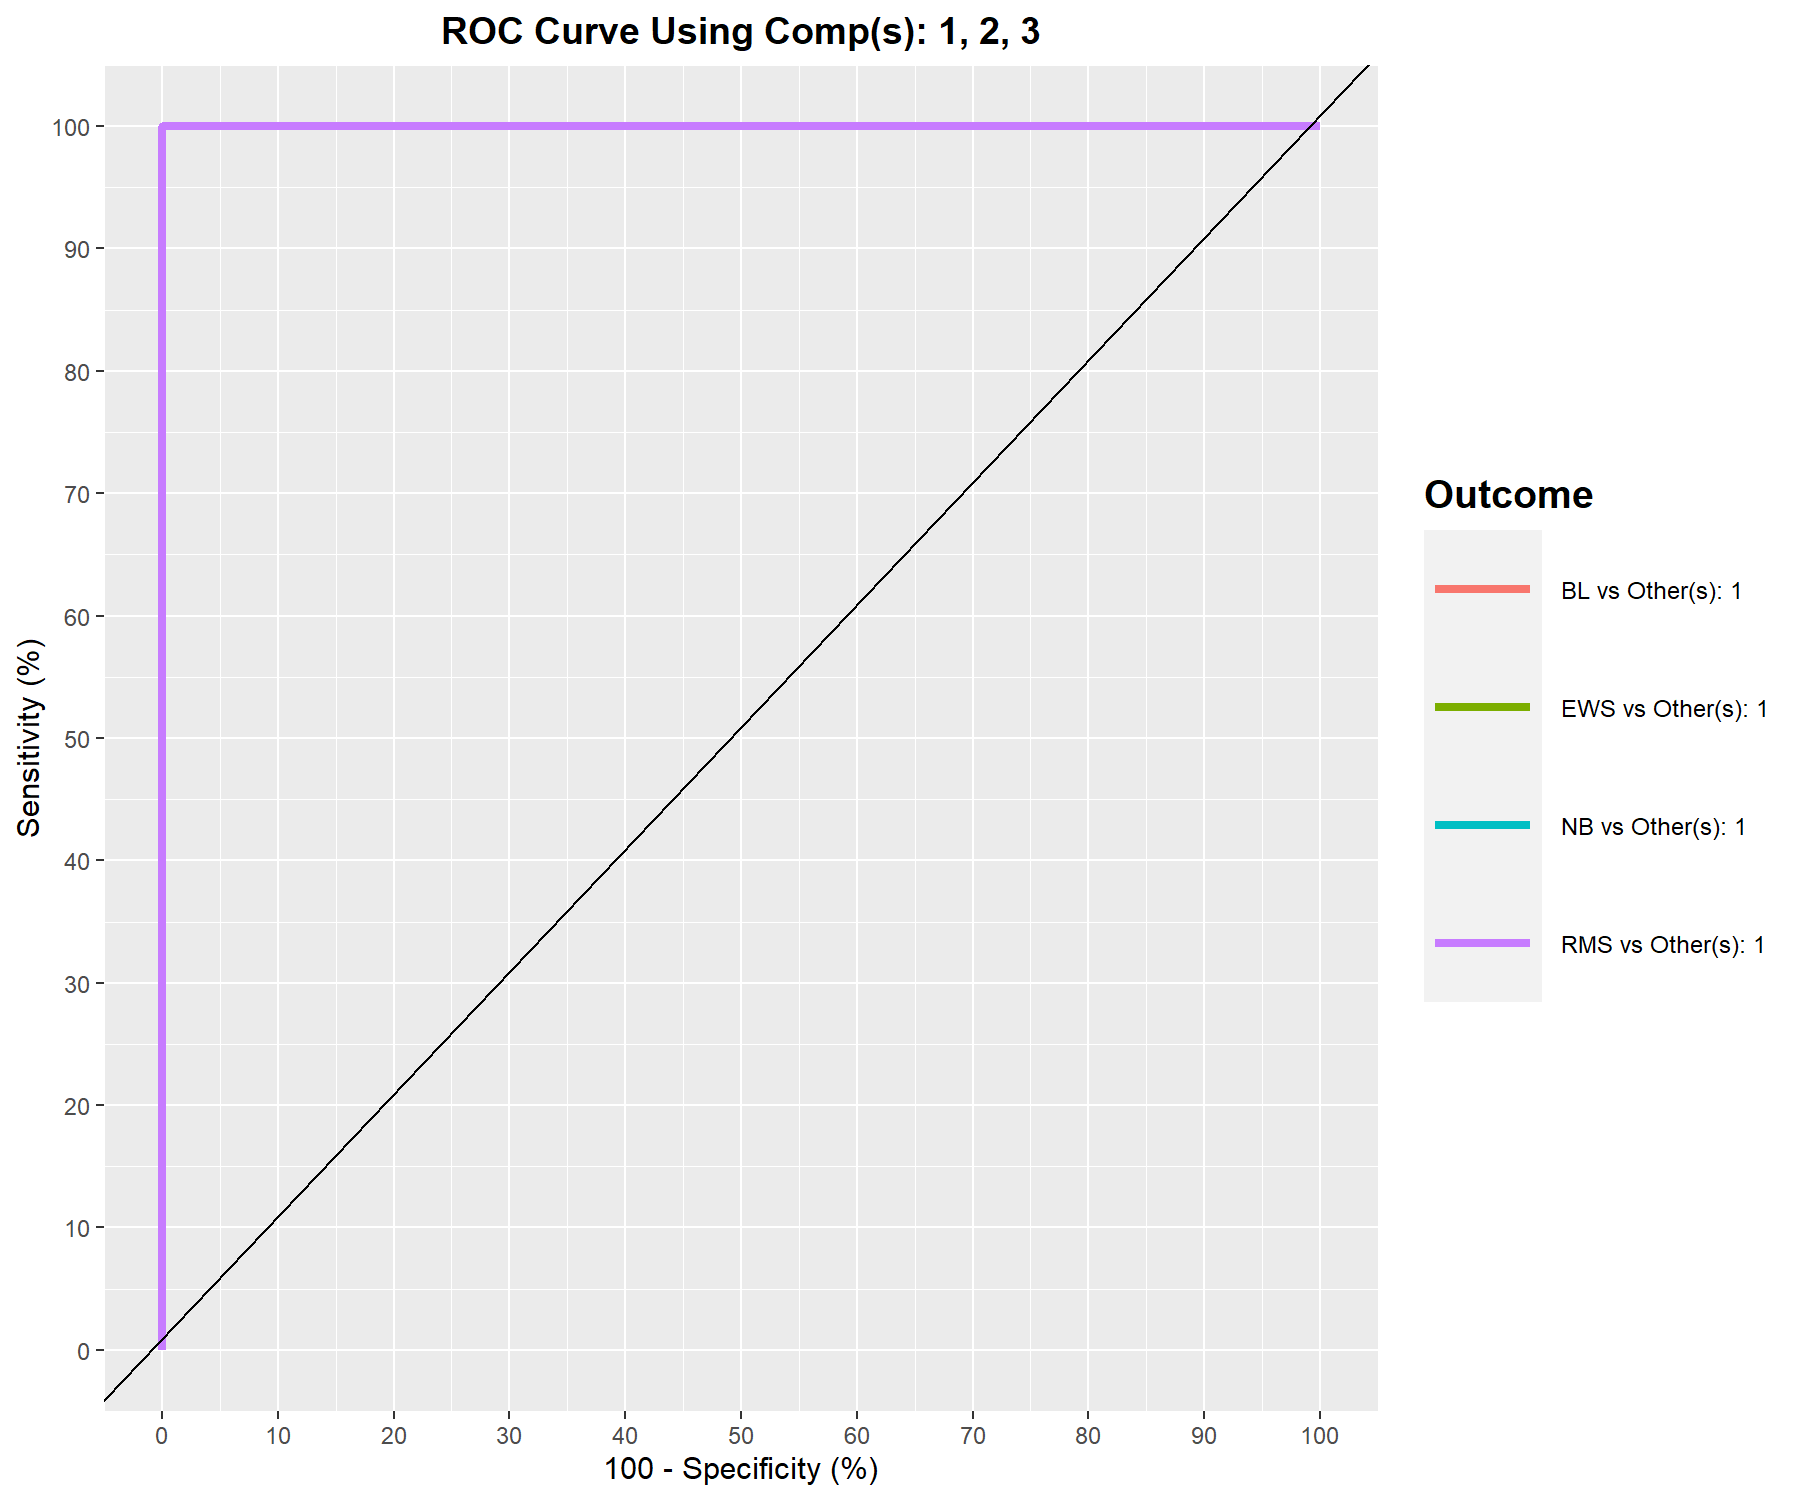 ROC curve and AUC from sPLS-DA on the SRBCT gene expression data on component 1 averaged across one-vs.-all comparisons. Numerical outputs include the AUC and a Wilcoxon test p-value for each ‘one vs. other’ class comparisons that are performed per component. This output complements the sPLS-DA performance evaluation but should not be used for tuning (as the prediction process in sPLS-DA is based on prediction distances, not a cutoff that maximises specificity and sensitivity as in ROC). The plot suggests that the sPLS-DA model can distinguish BL subjects from the other groups with a high true positive and low false positive rate, while the model is less well able to distinguish samples from other classes on component 1.